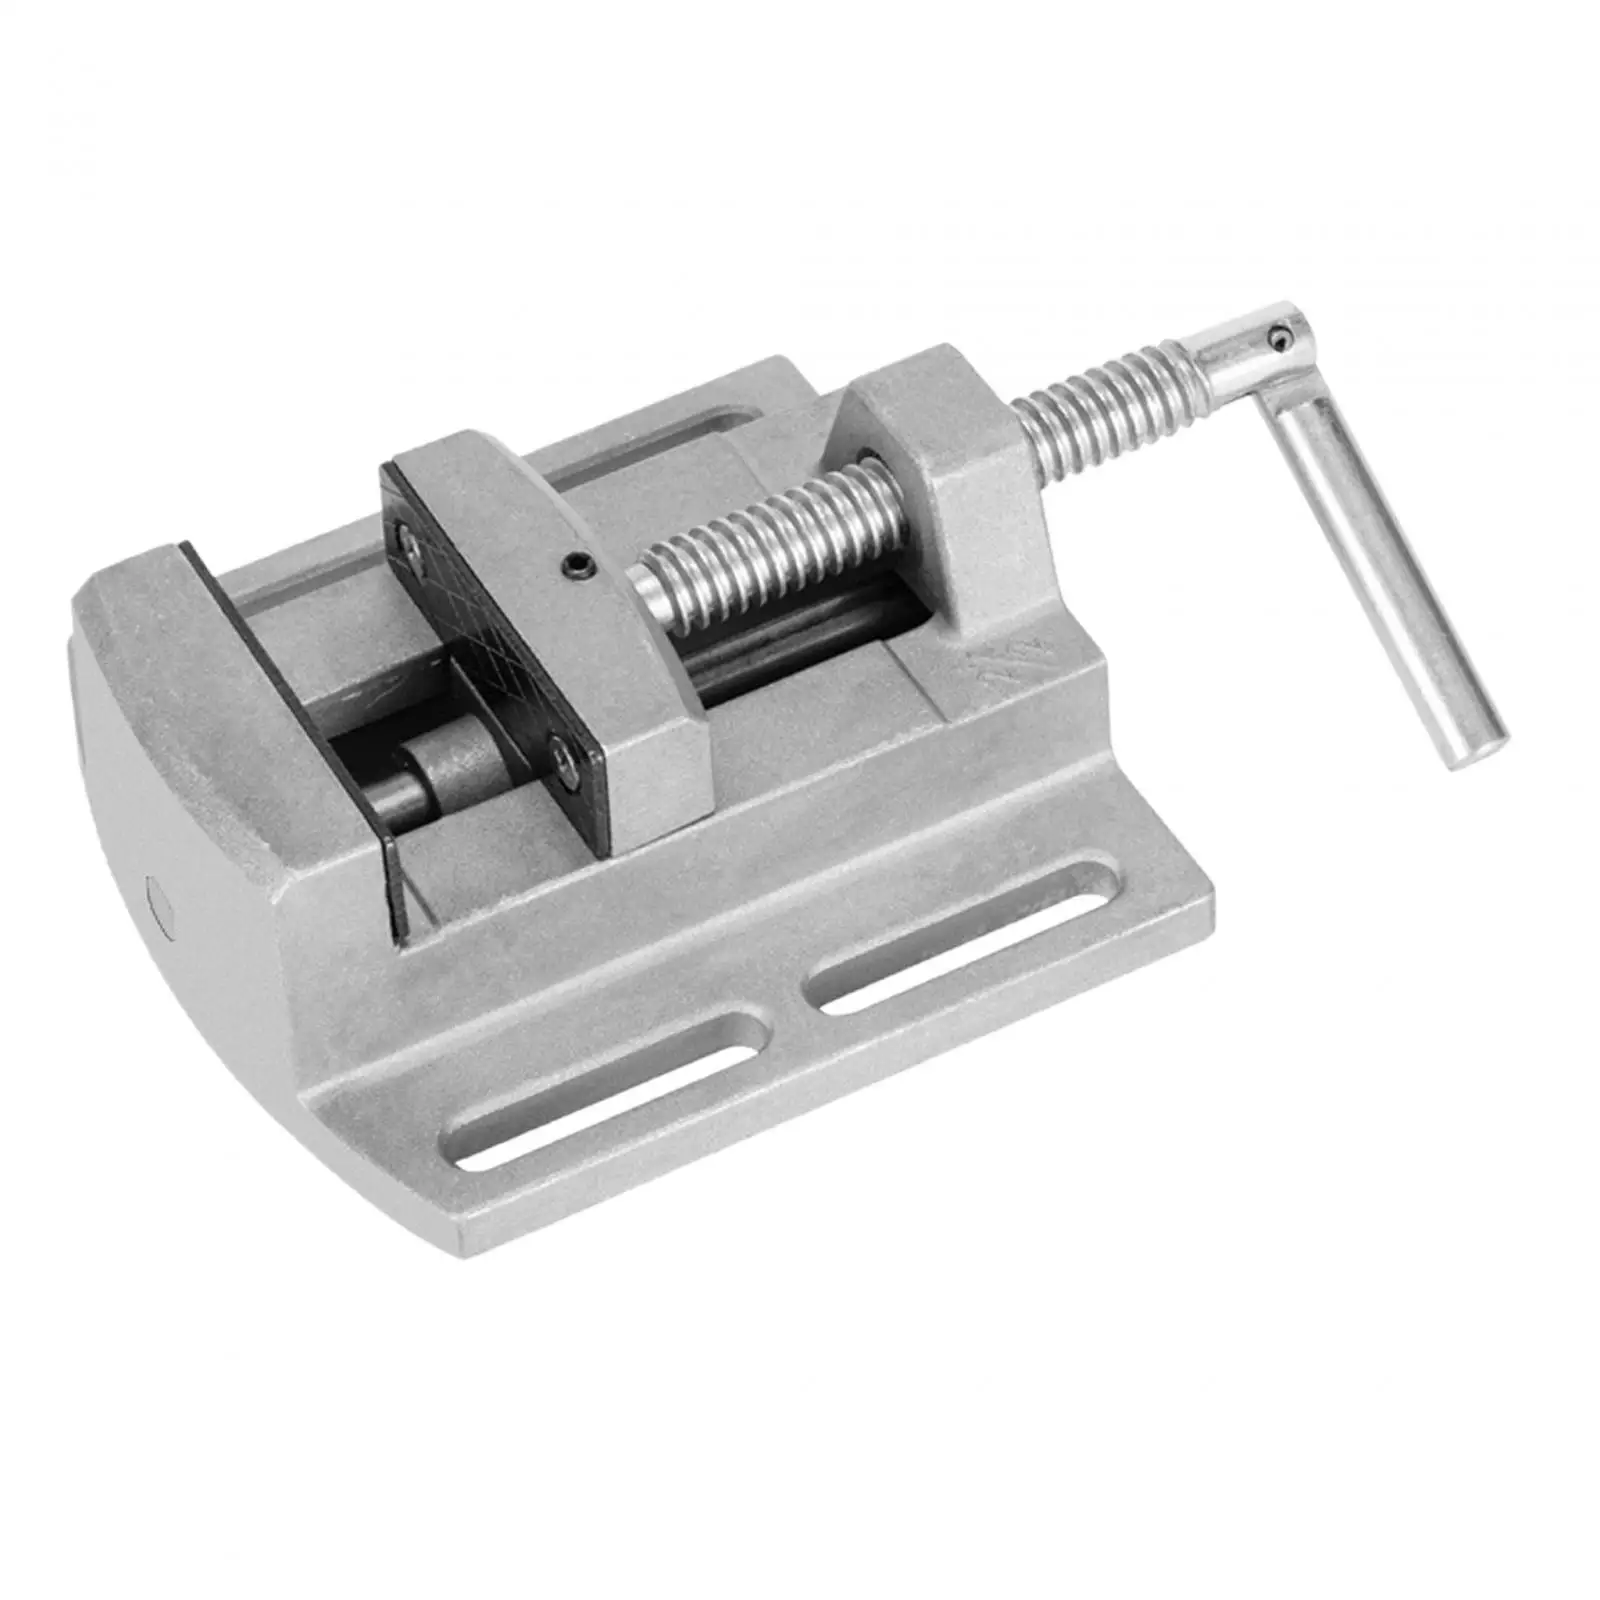 Drill Press Vise Portable Heavy Duty DIY Woodworking Clamps Jewelry Making Craft Building Work Metalworking Parallel Table Vise